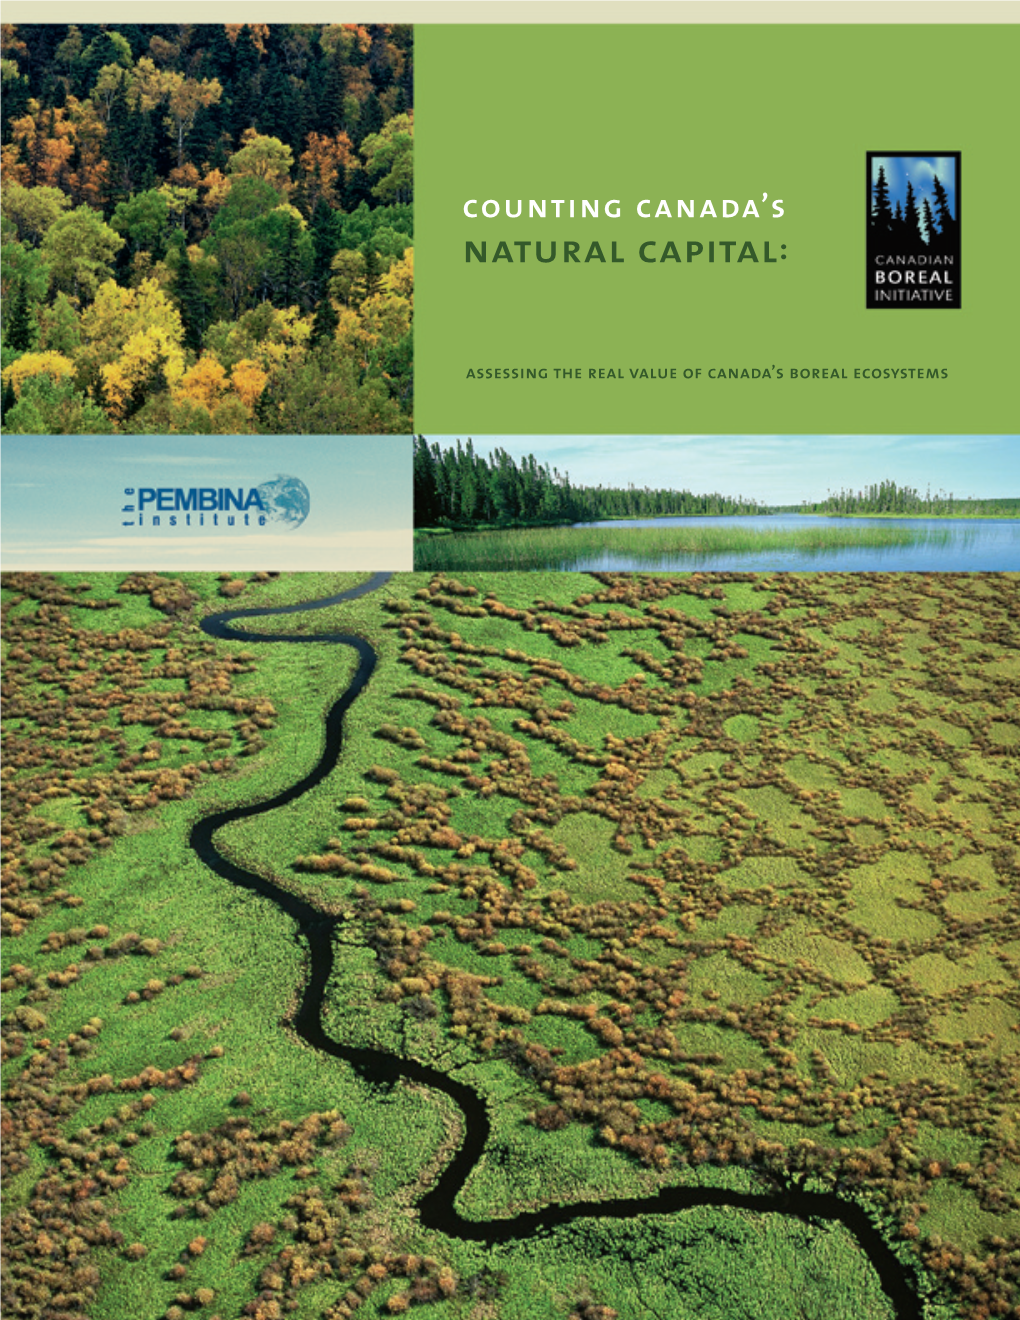 Counting Canada's Natural Capital